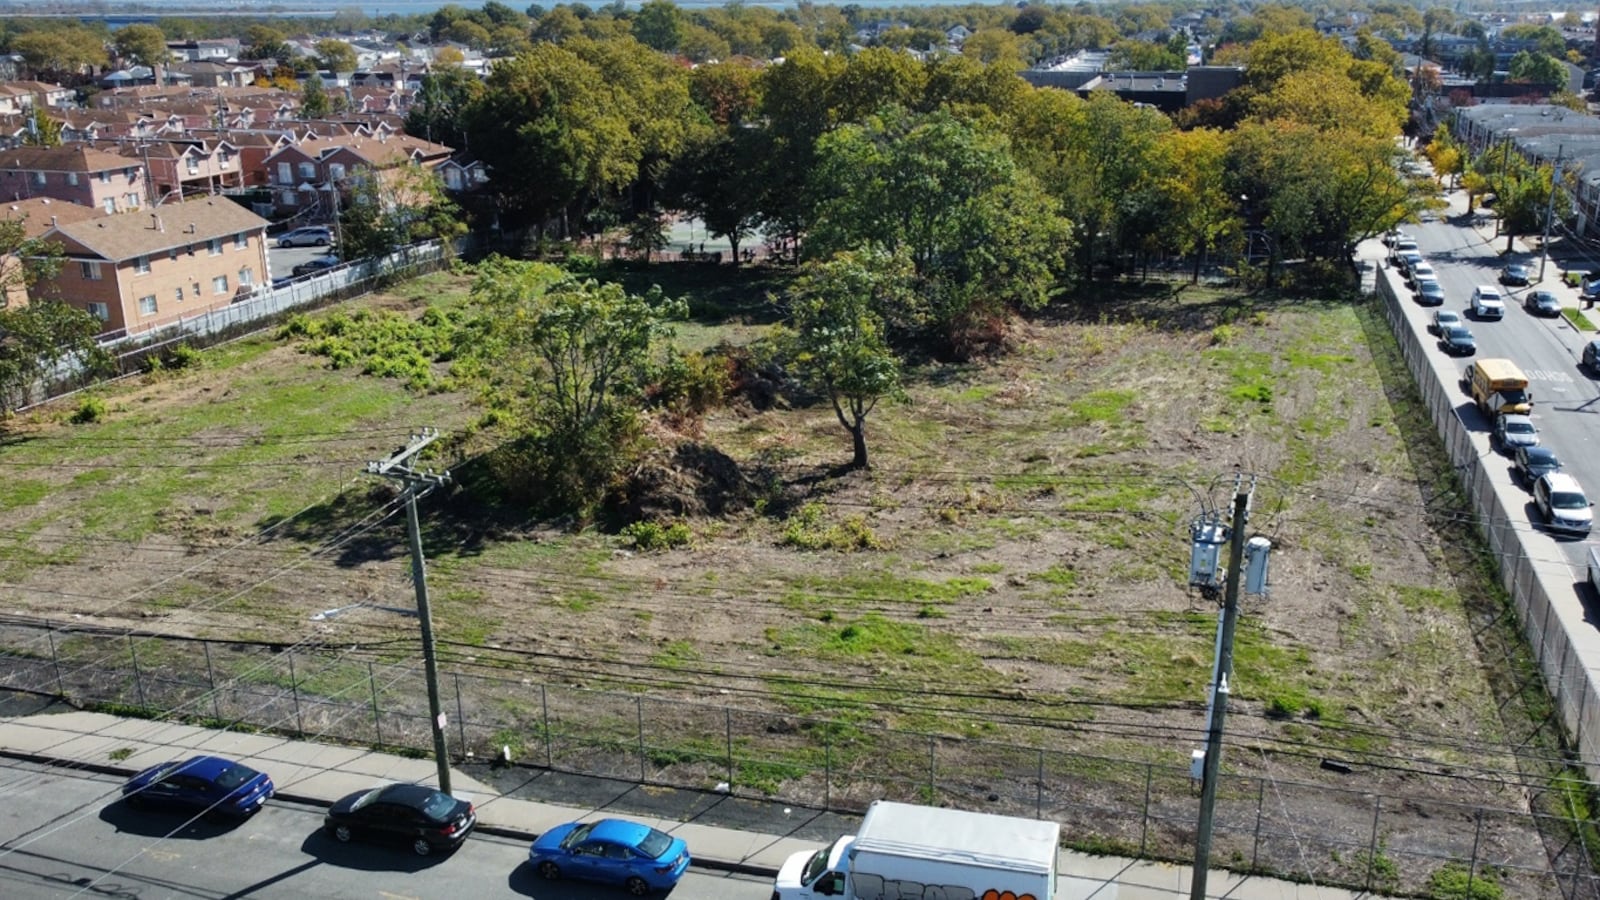 Patches of dirt and grass, as well as a few trees, cover a fenced off lot near P.S. 312 in Brooklyn.